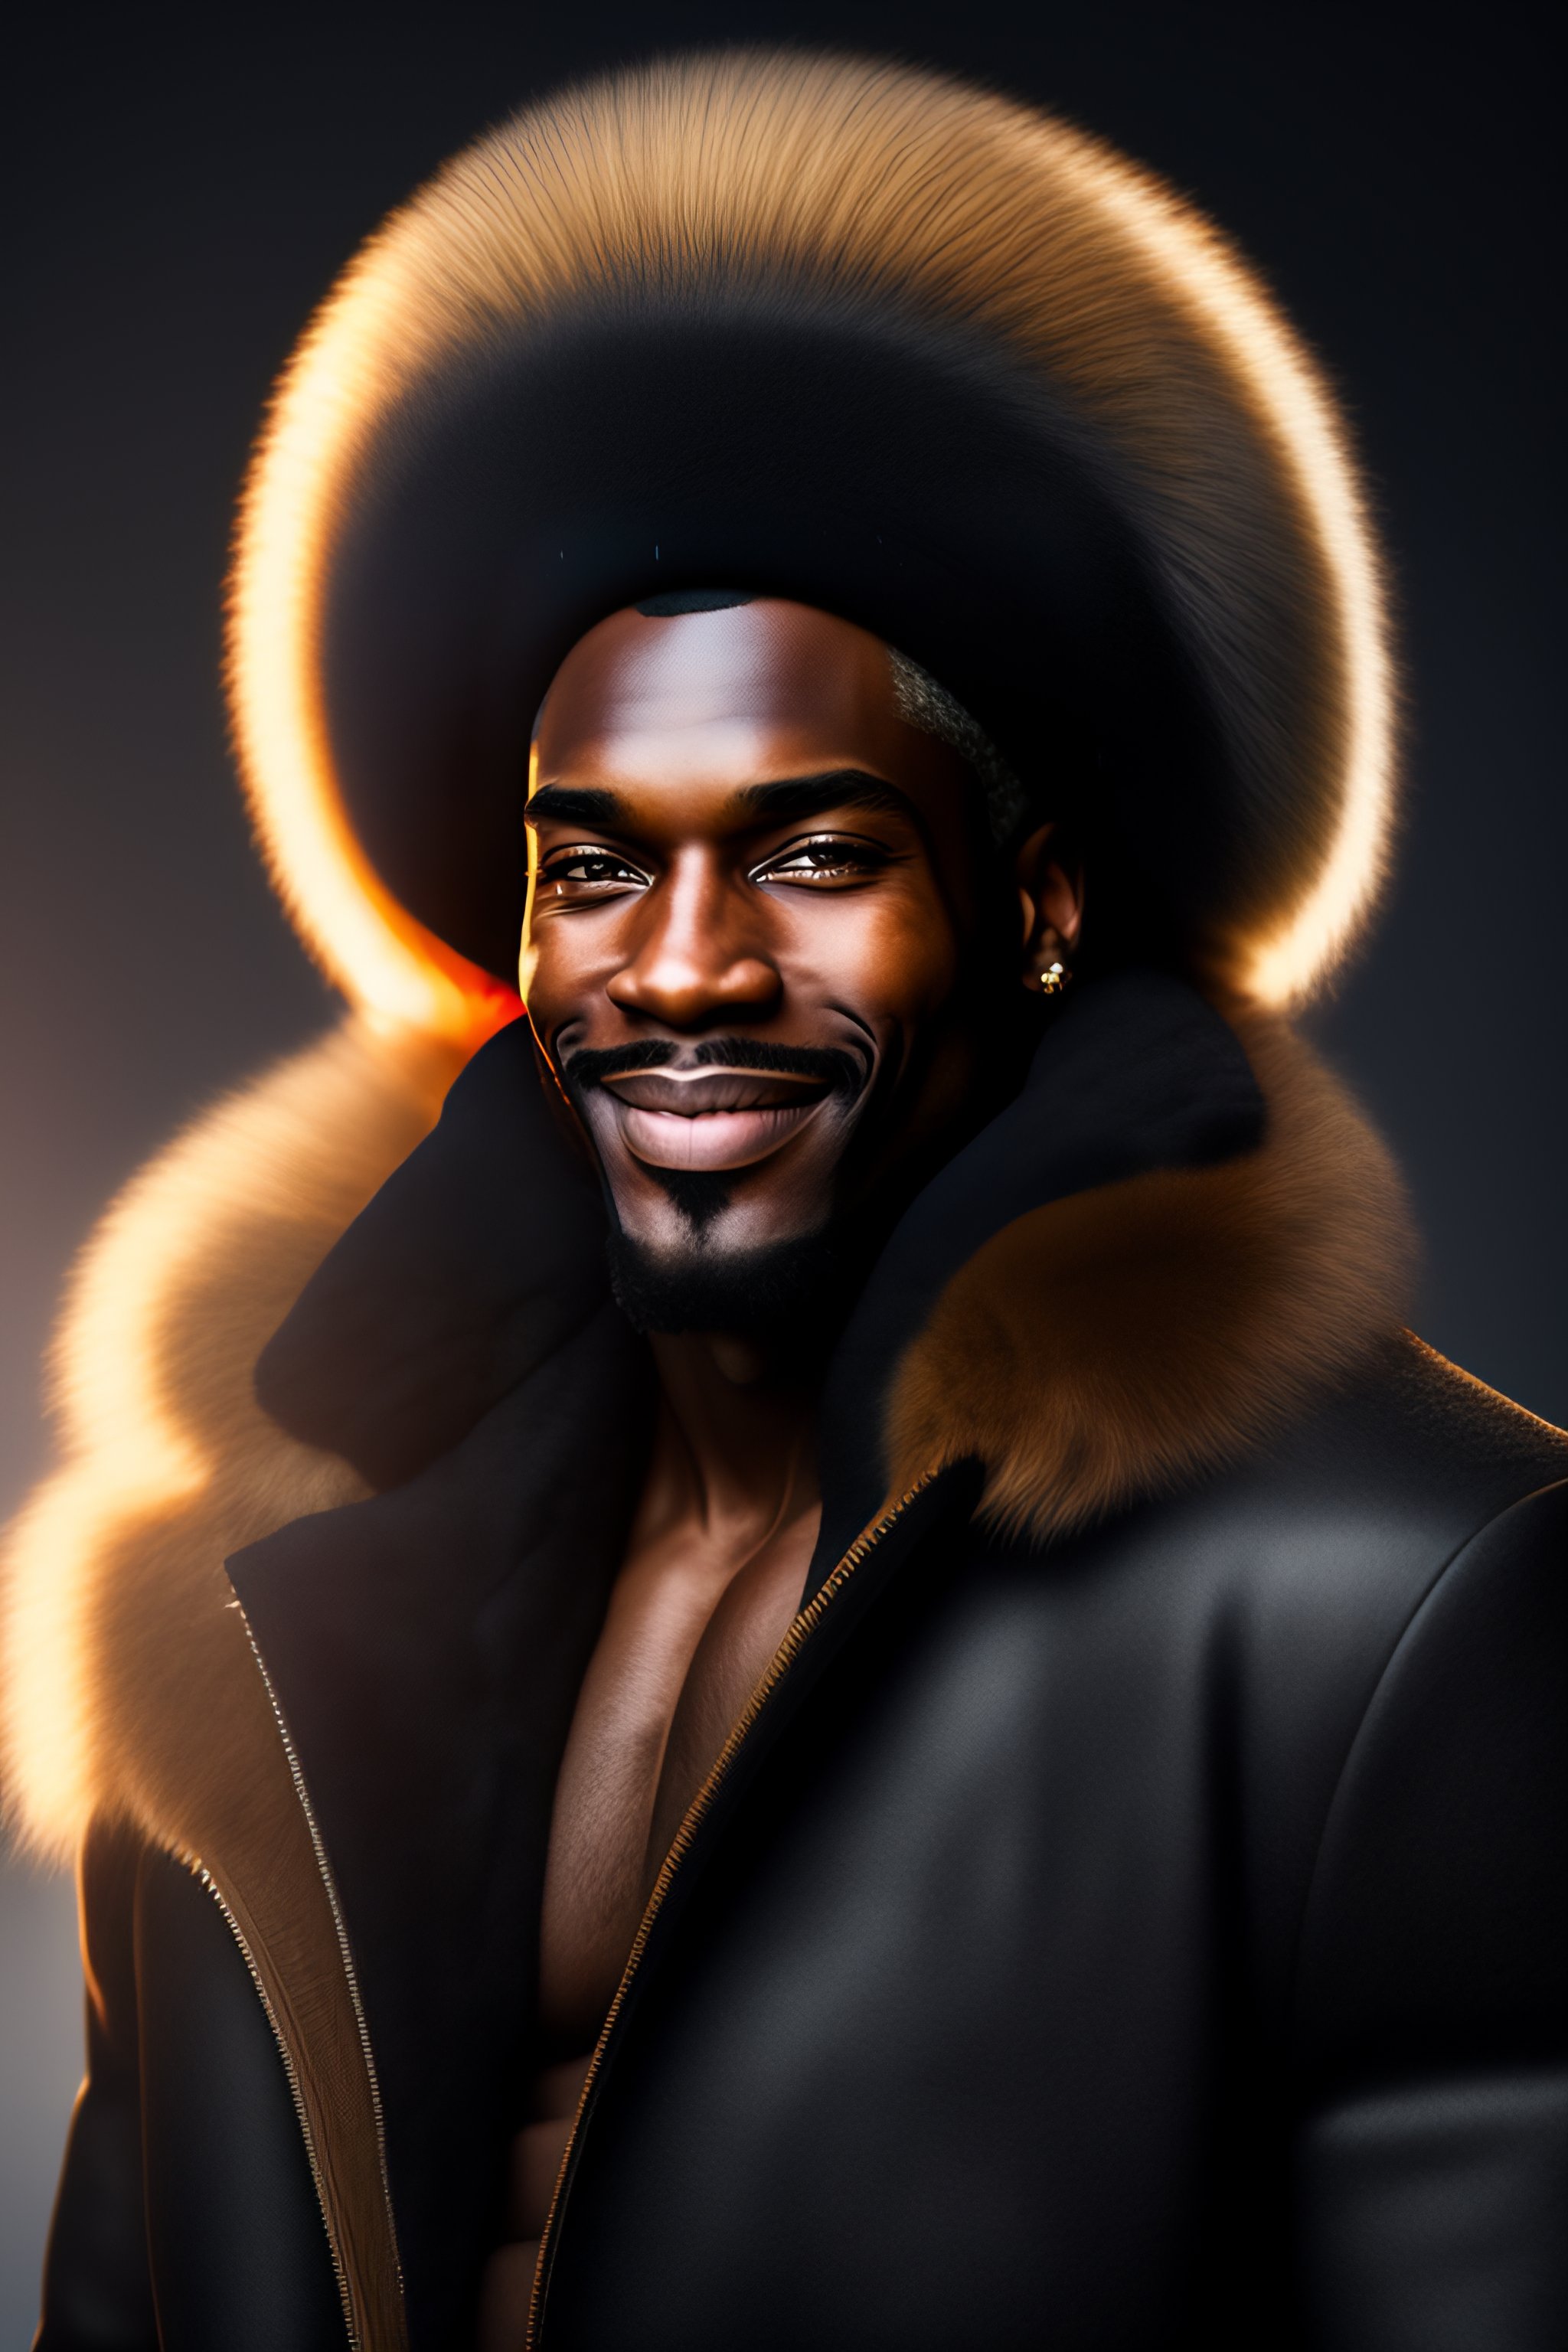 Lexica - Black man with chiseled face wearing a fur jacket, evil smile